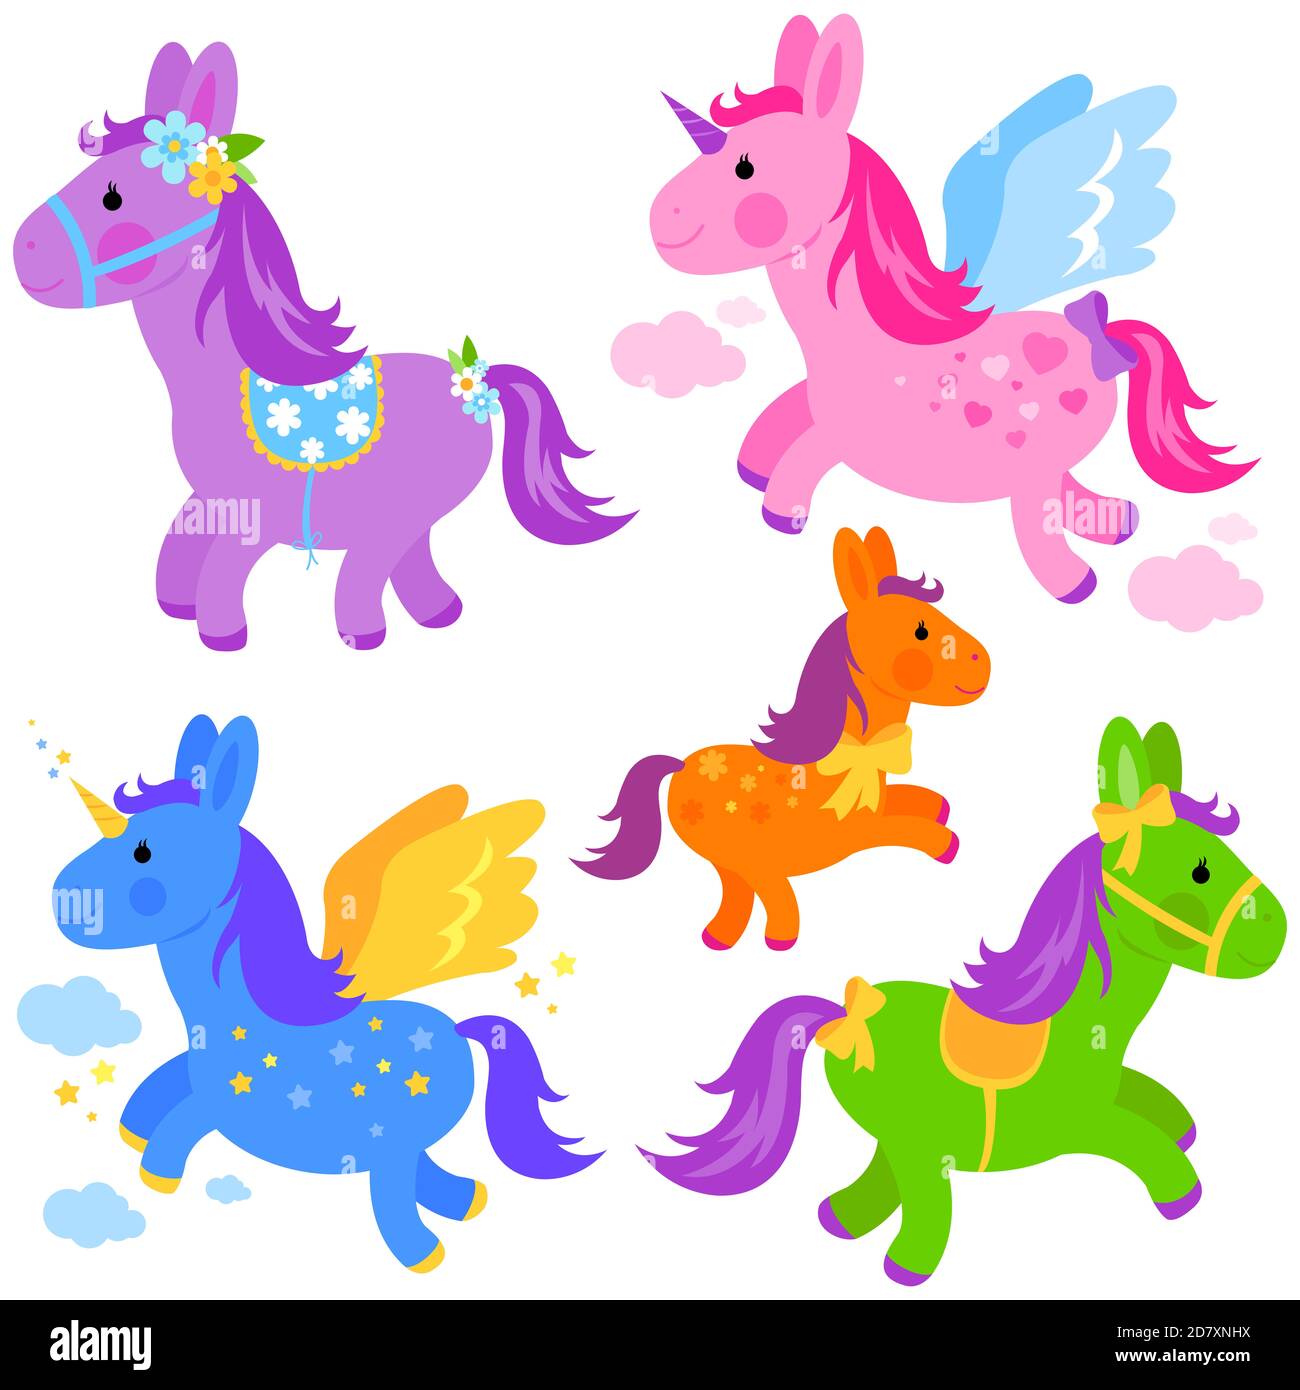 Colorful ponies and unicorns set. Illustration collection Stock Photo